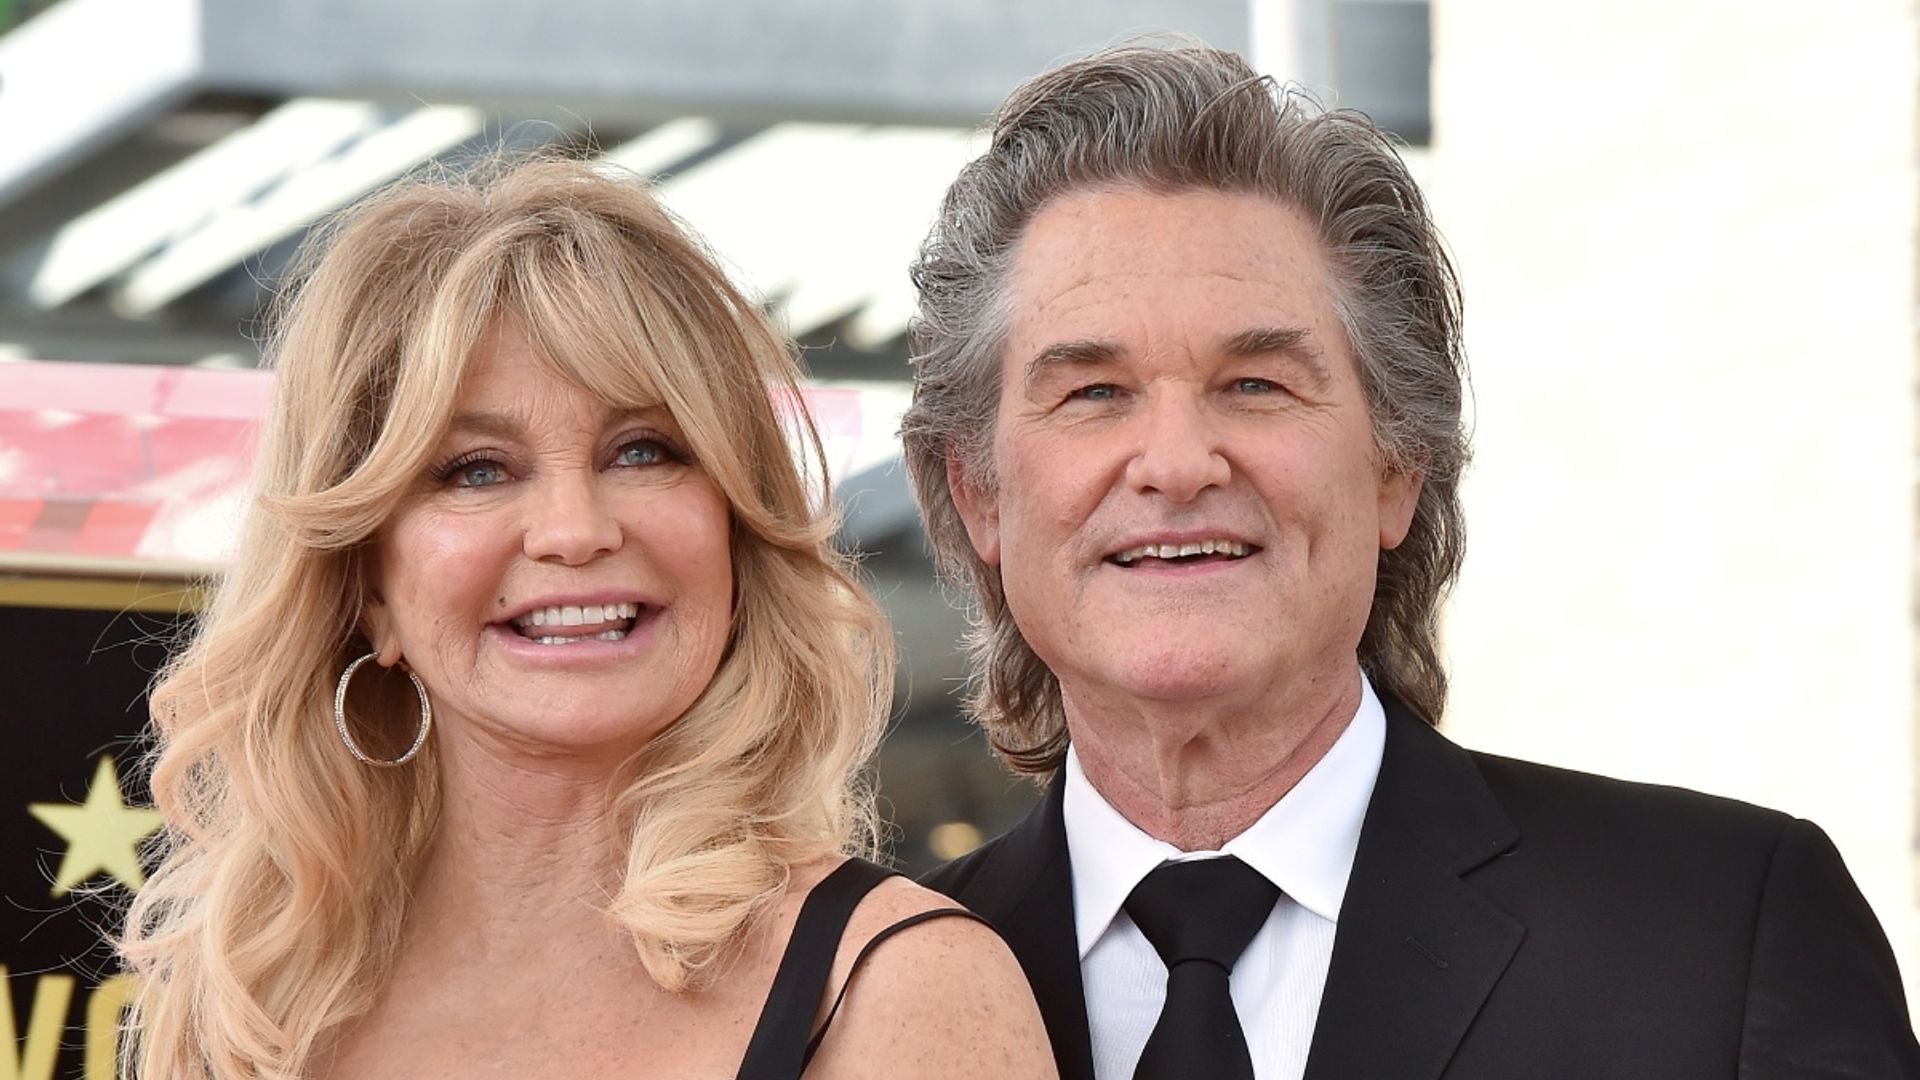 goldie hawn kurt russell family